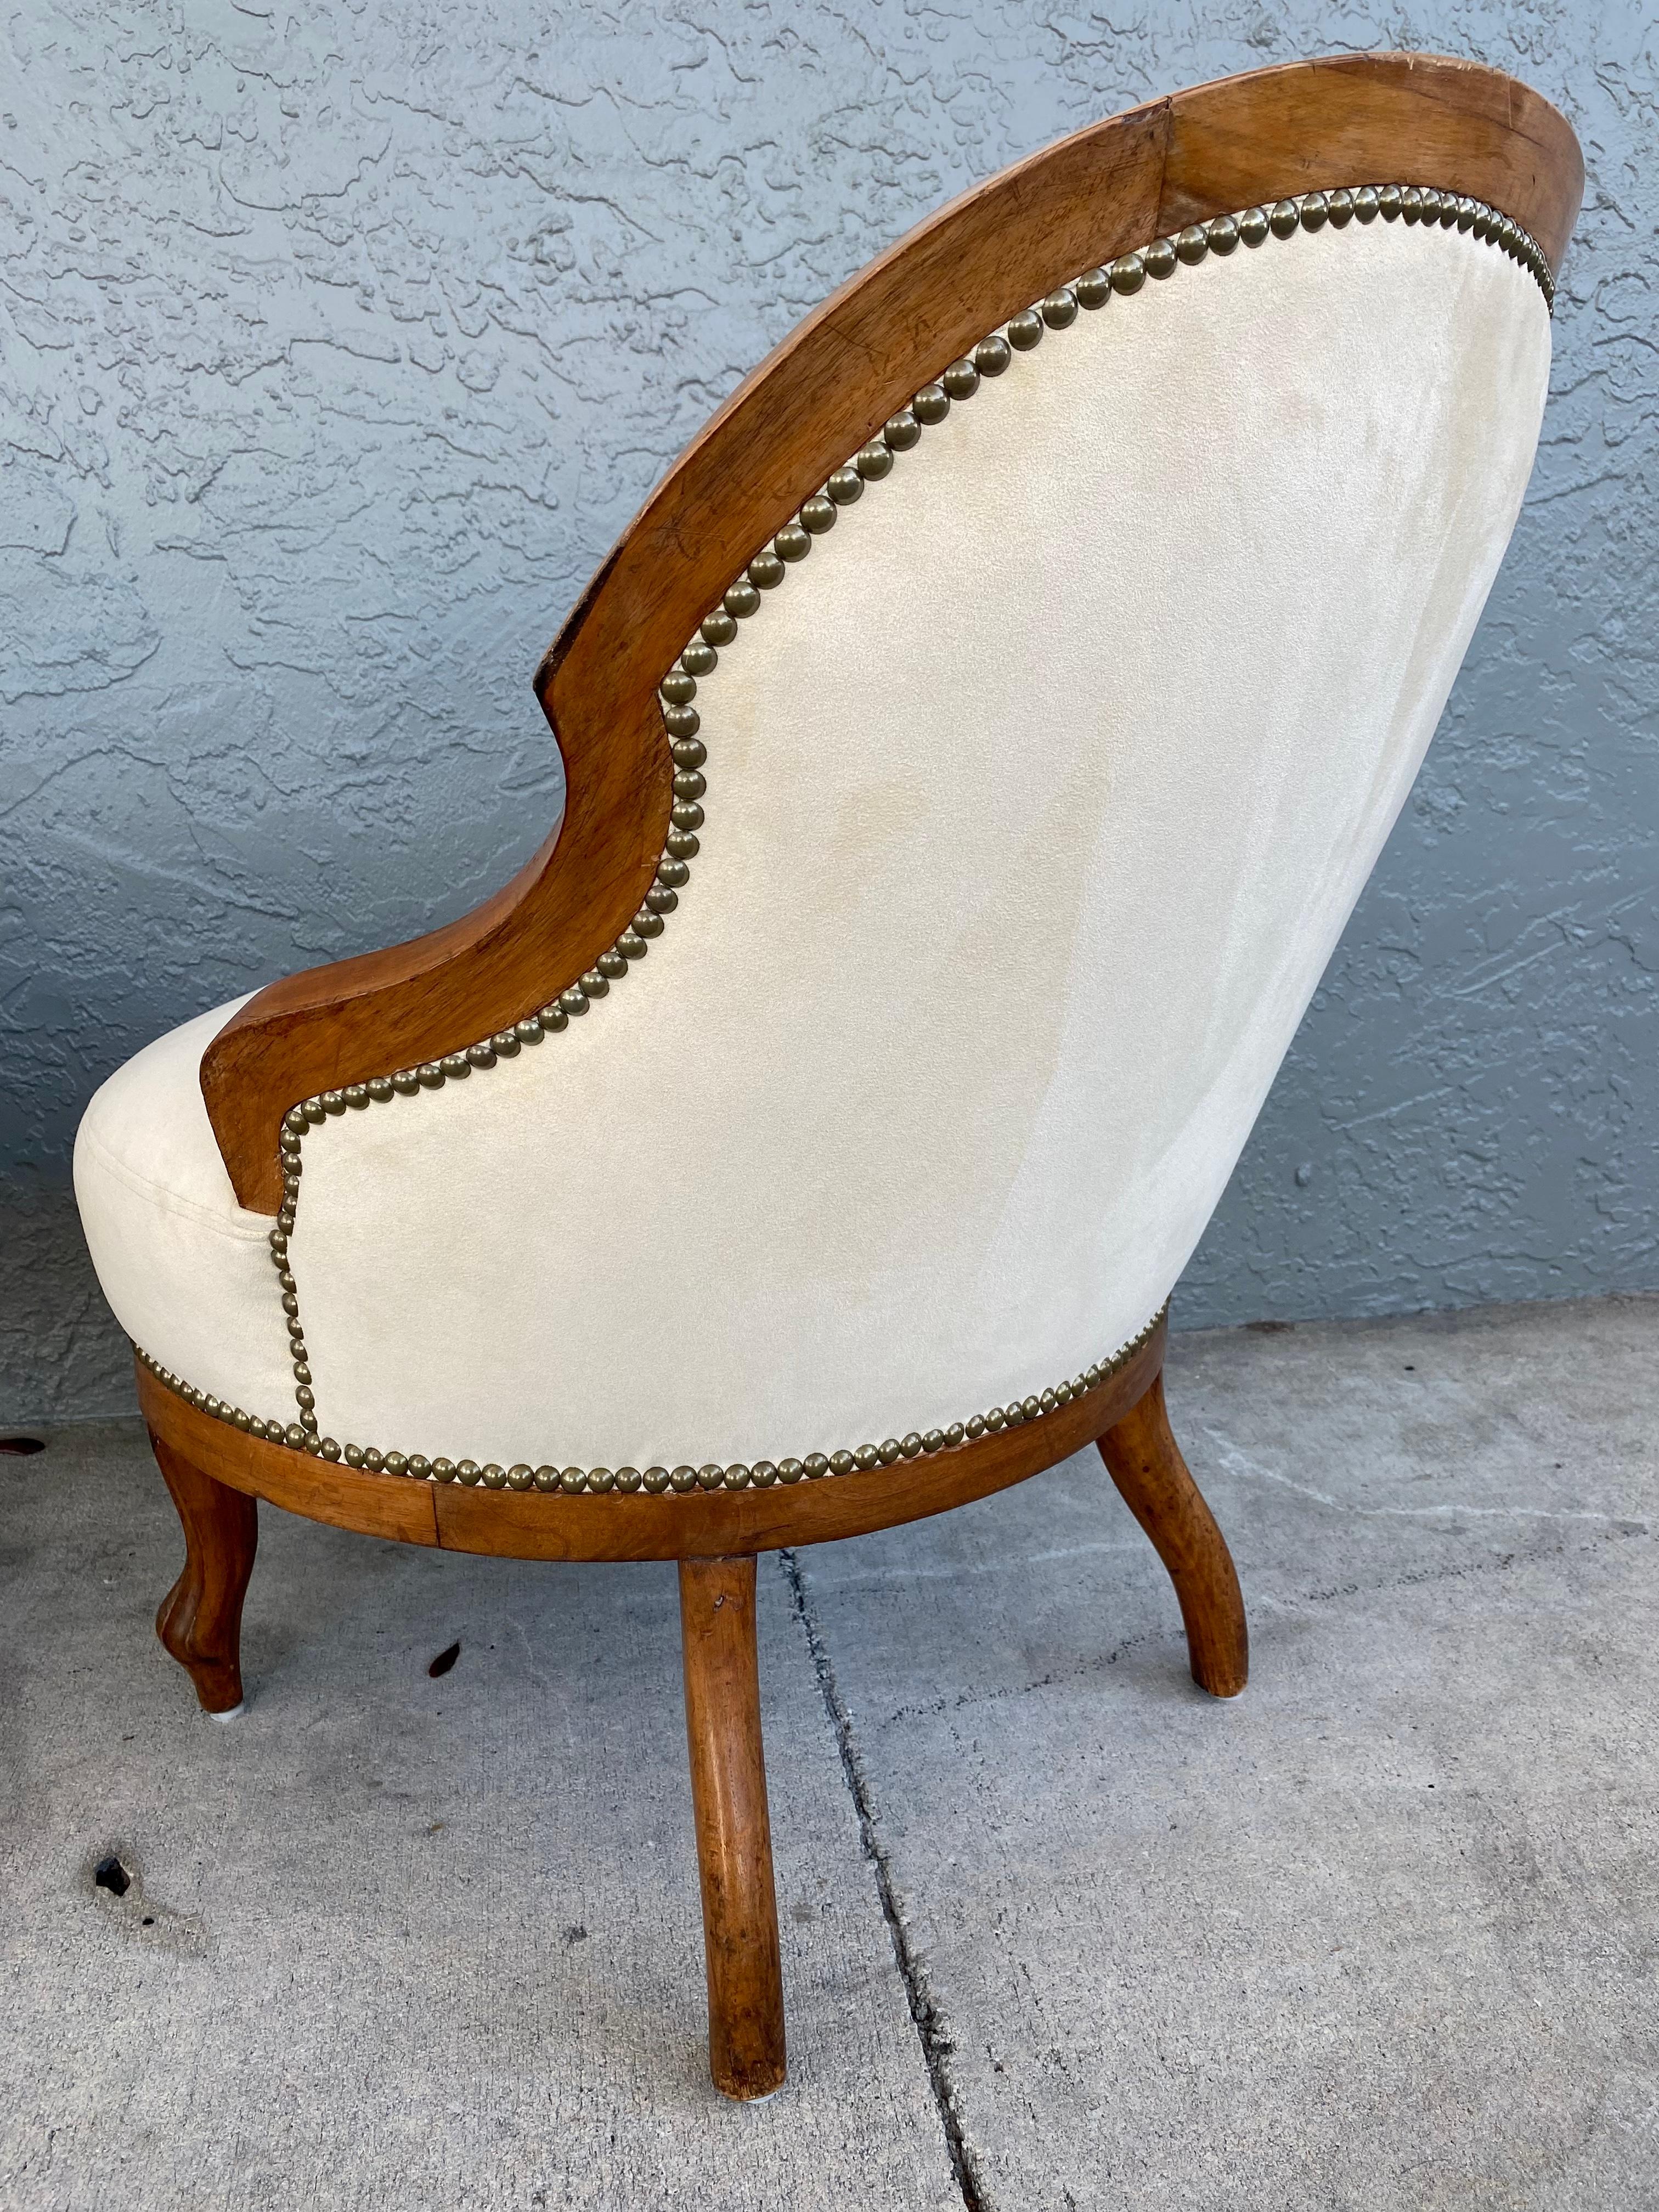 1940s Petite Nailhead Spoon Curved Rounded Slipper Chairs, Set of 2 For Sale 3